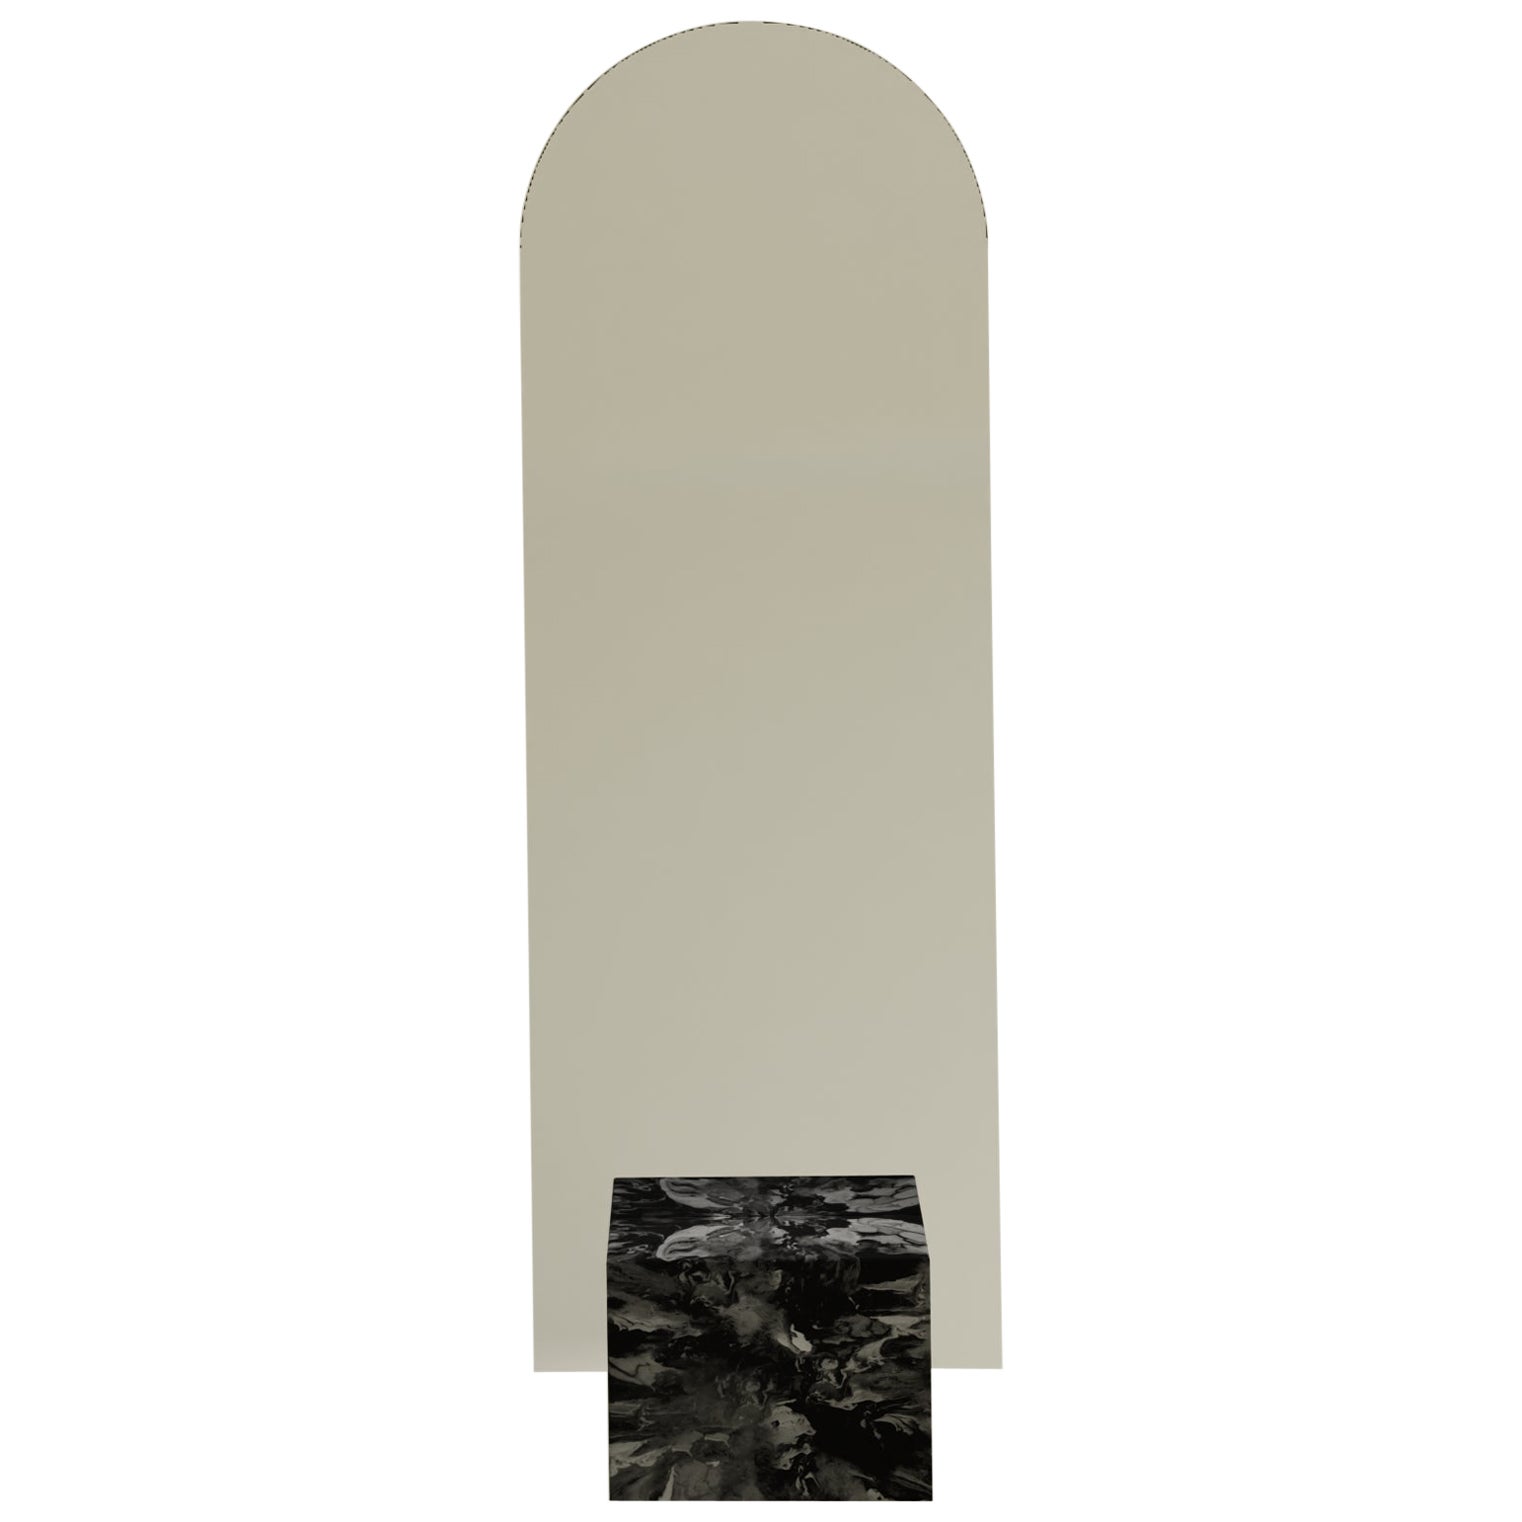 Black Standing Mirror Hand Crafted from 100% Recycled Plastic by Anqa Studios